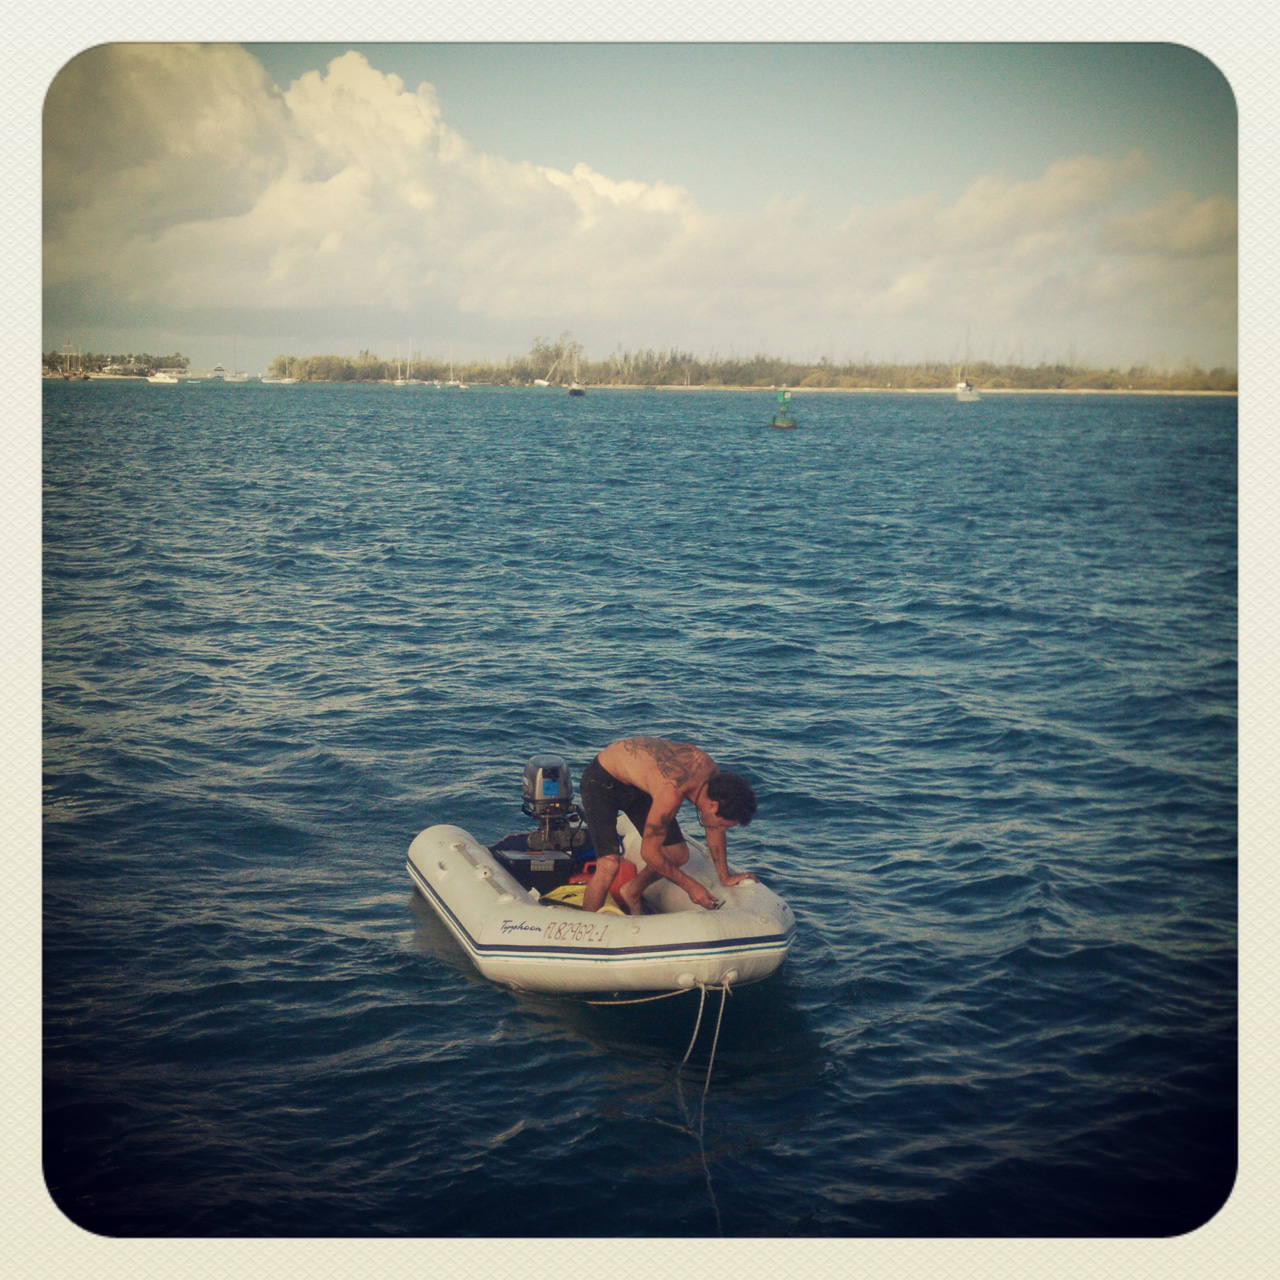 Tyler pumping up his dinghy._04-18-2013_014.jpg